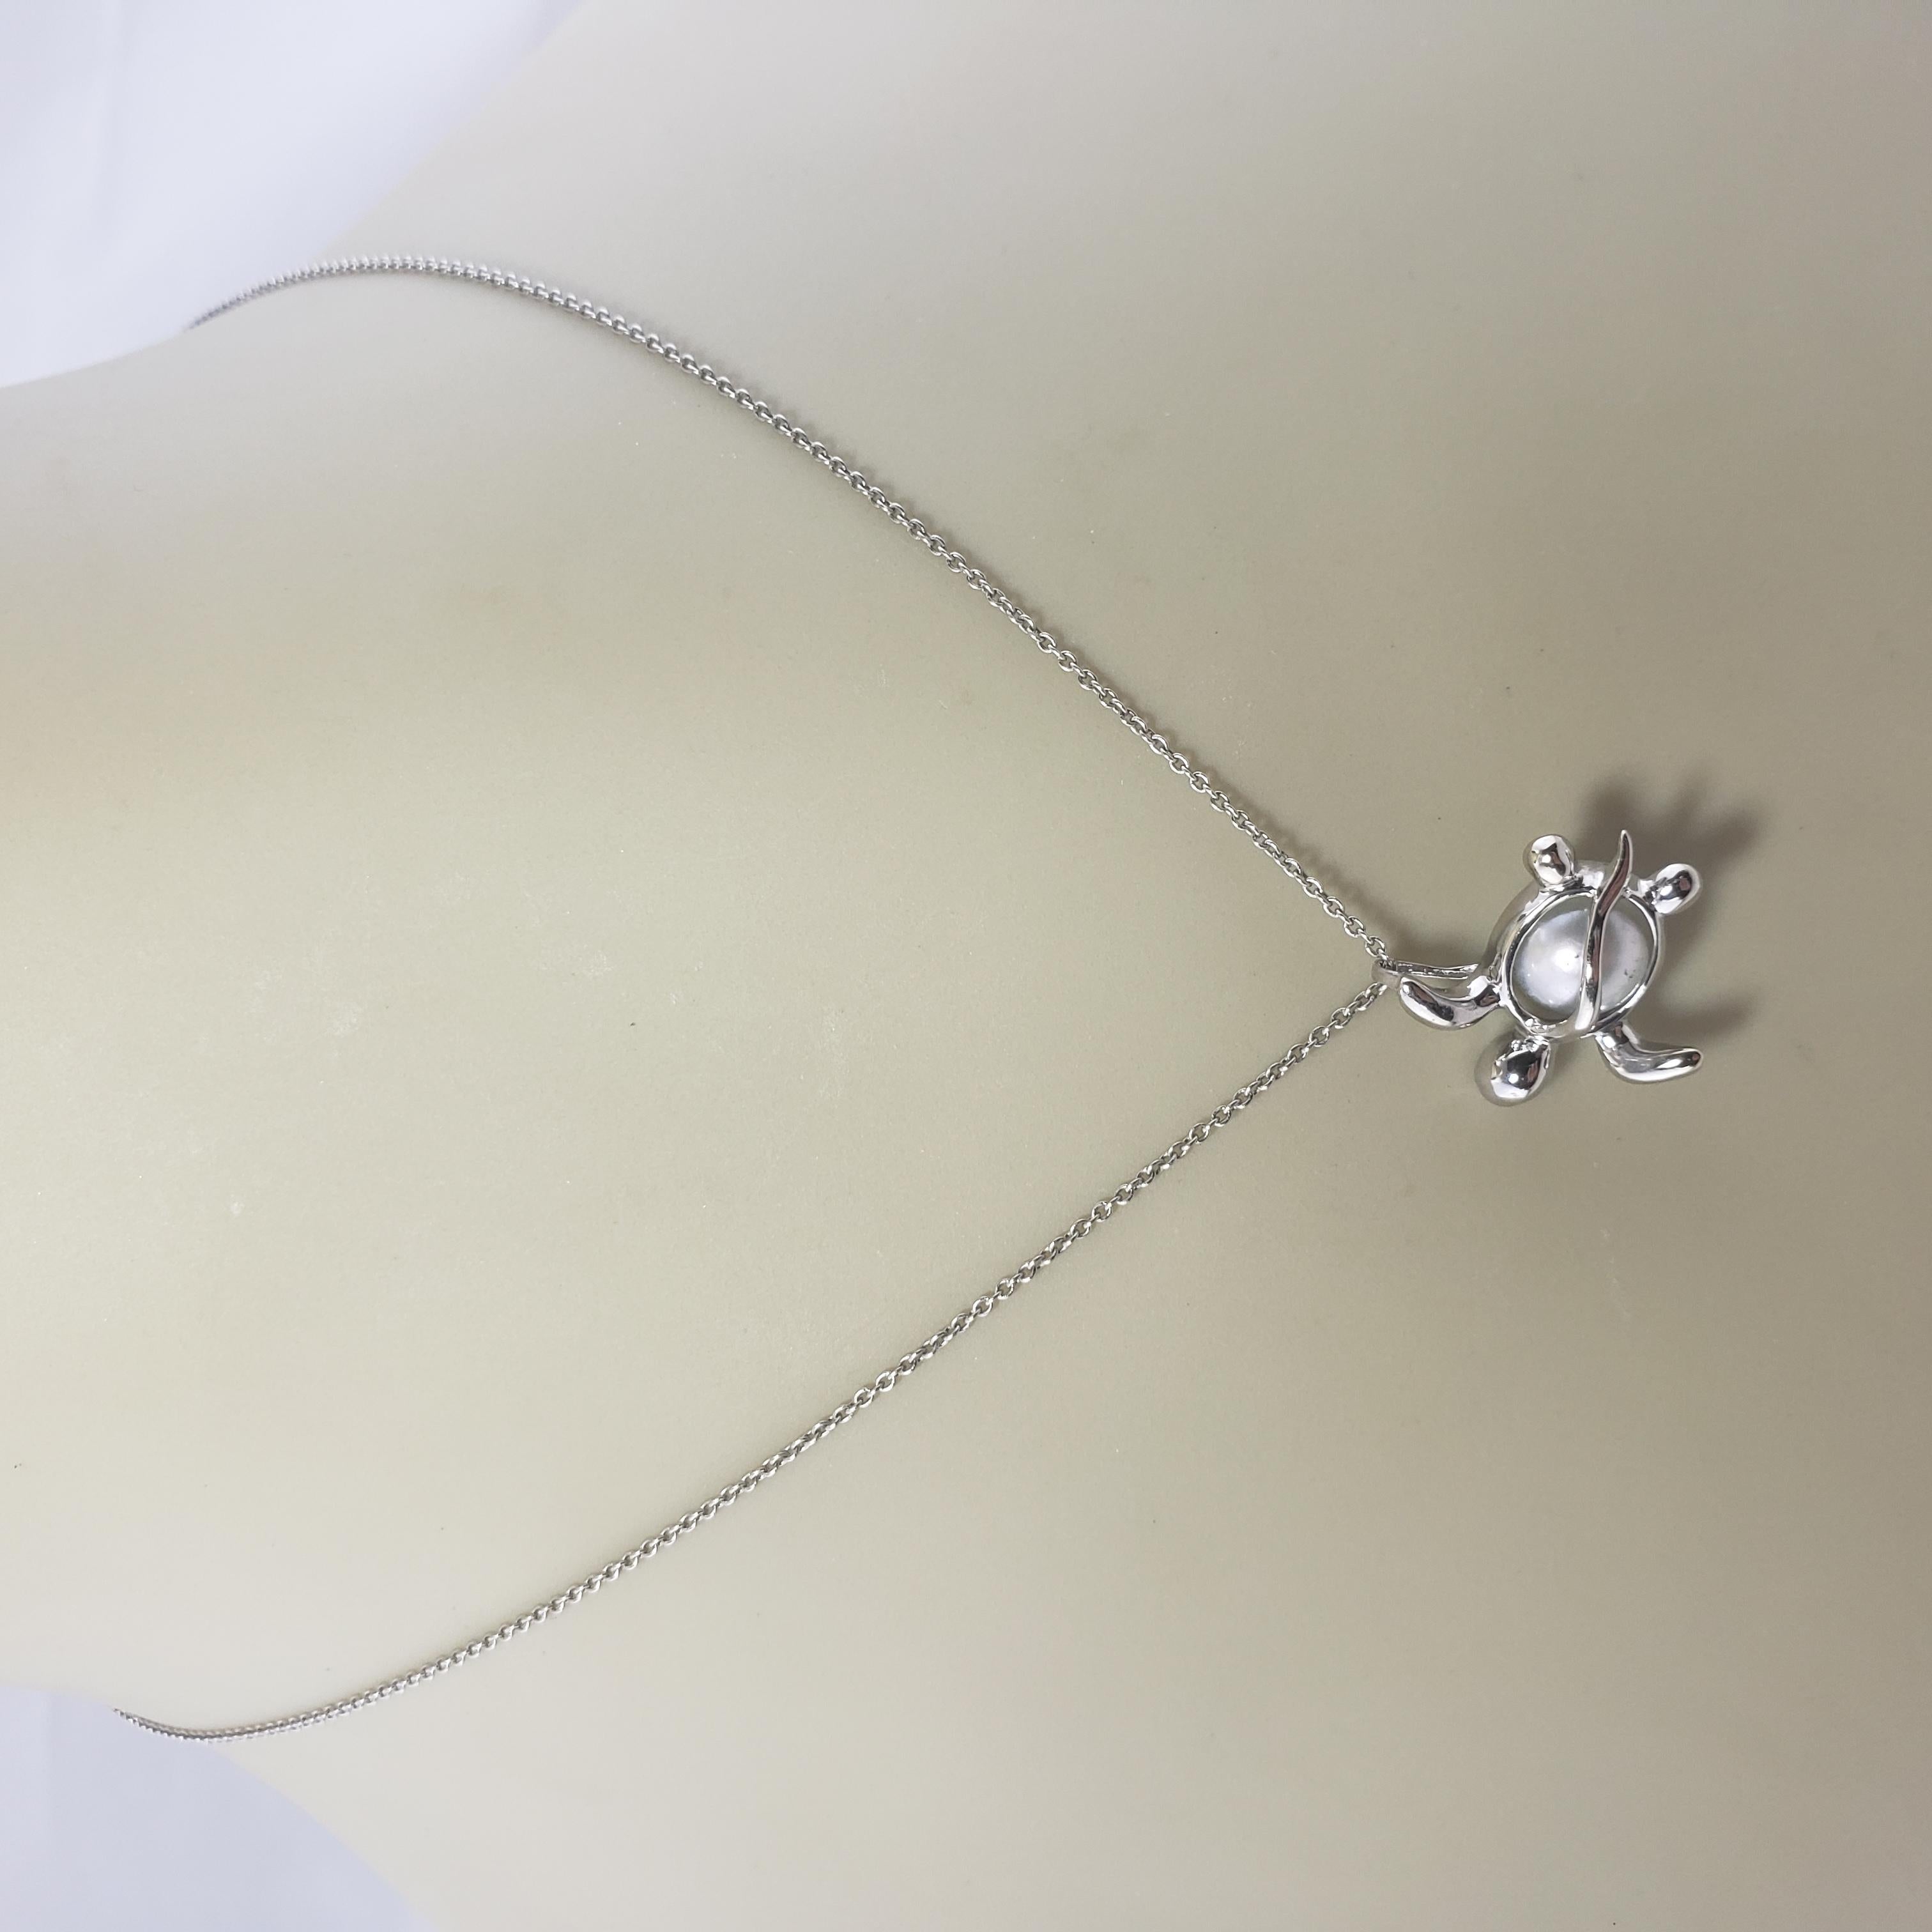 14 Karat White Gold and Pearl Turtle Charm #13091 For Sale 1